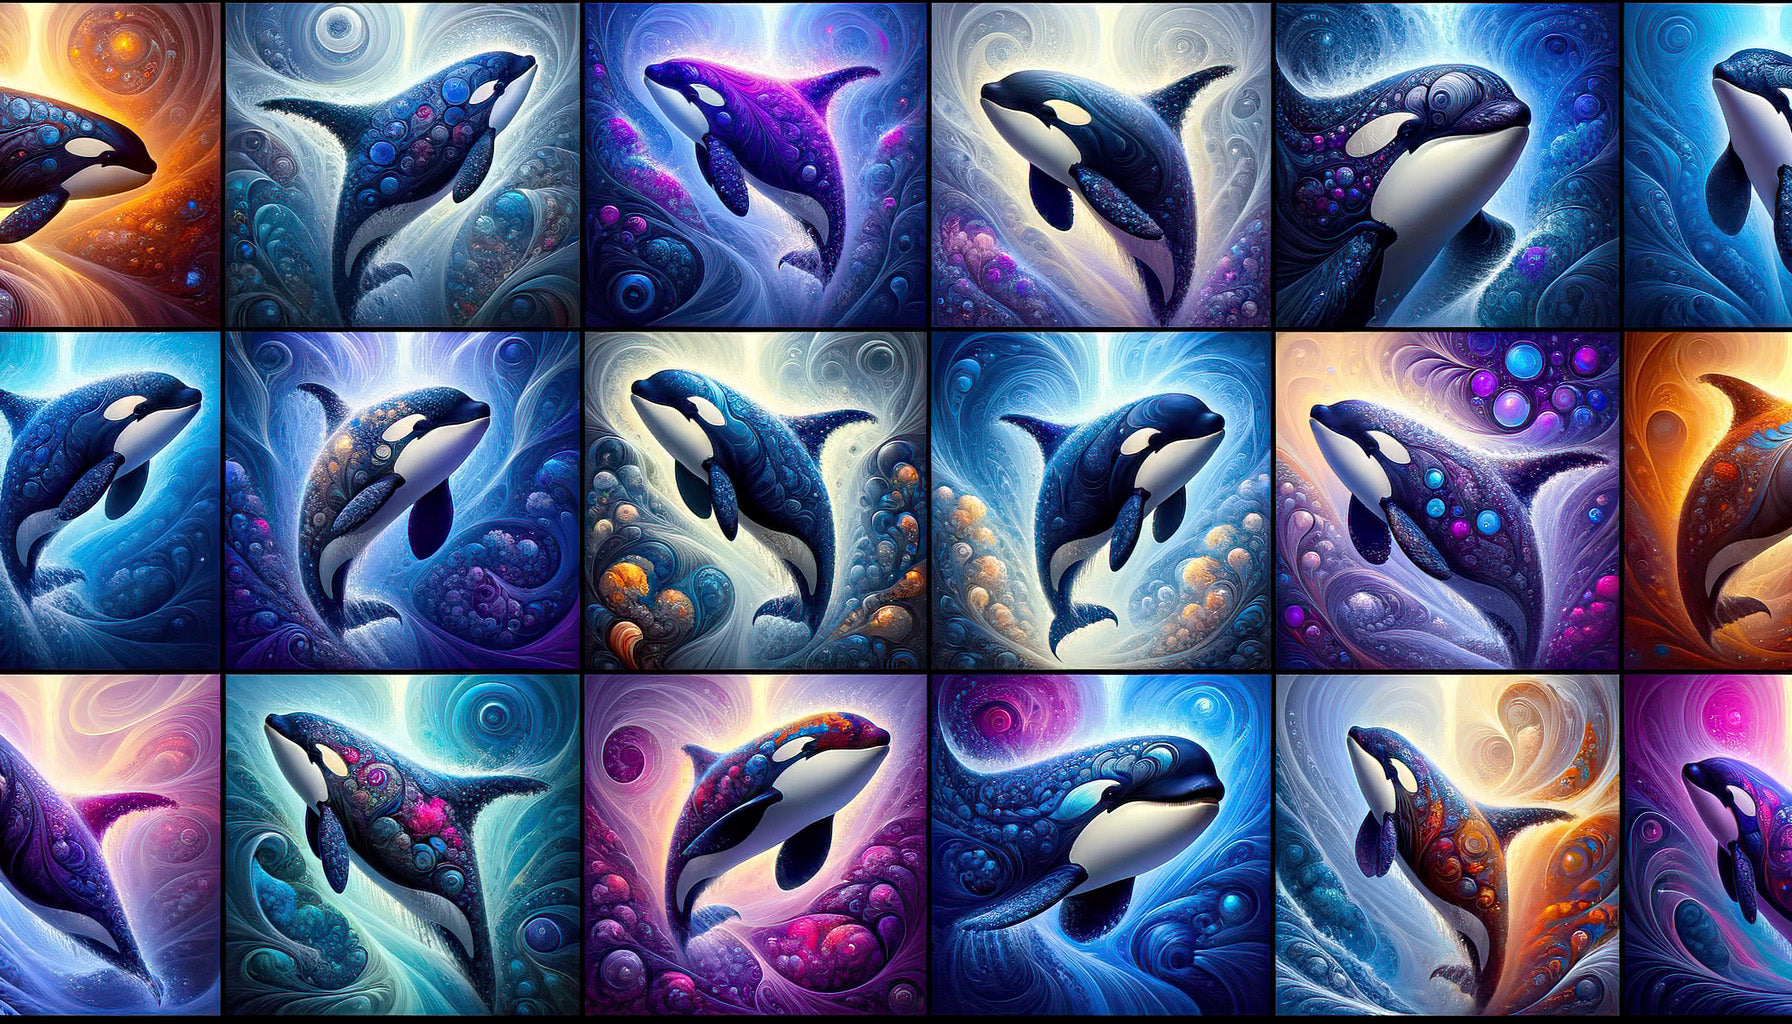 Orcas of Imagination